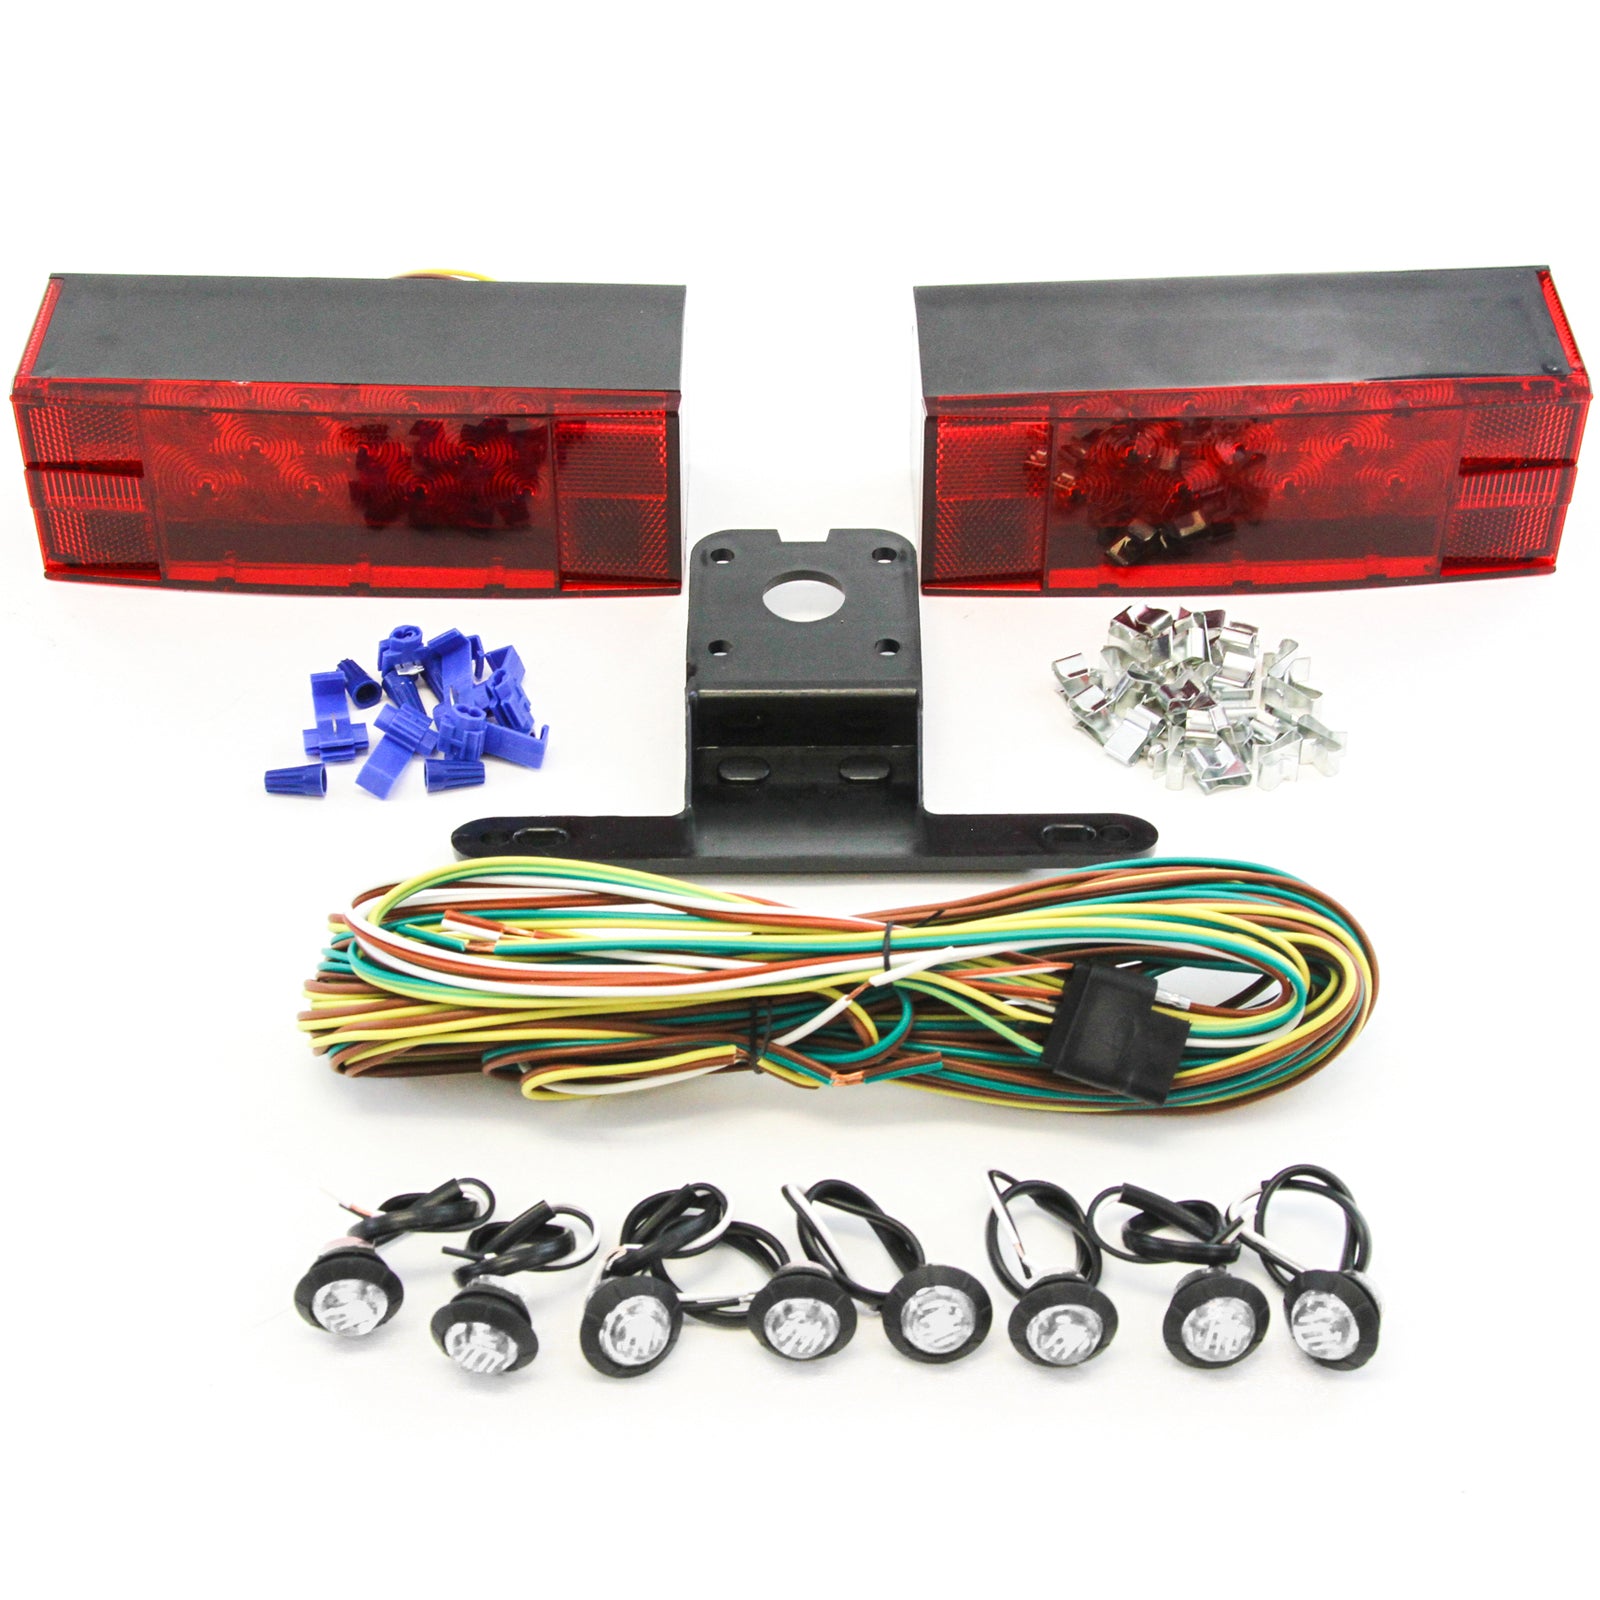 Red Hound Auto LED Submersible LowProfile Rectangle Light Kit Boat Marine & 8 Clear Side Marker